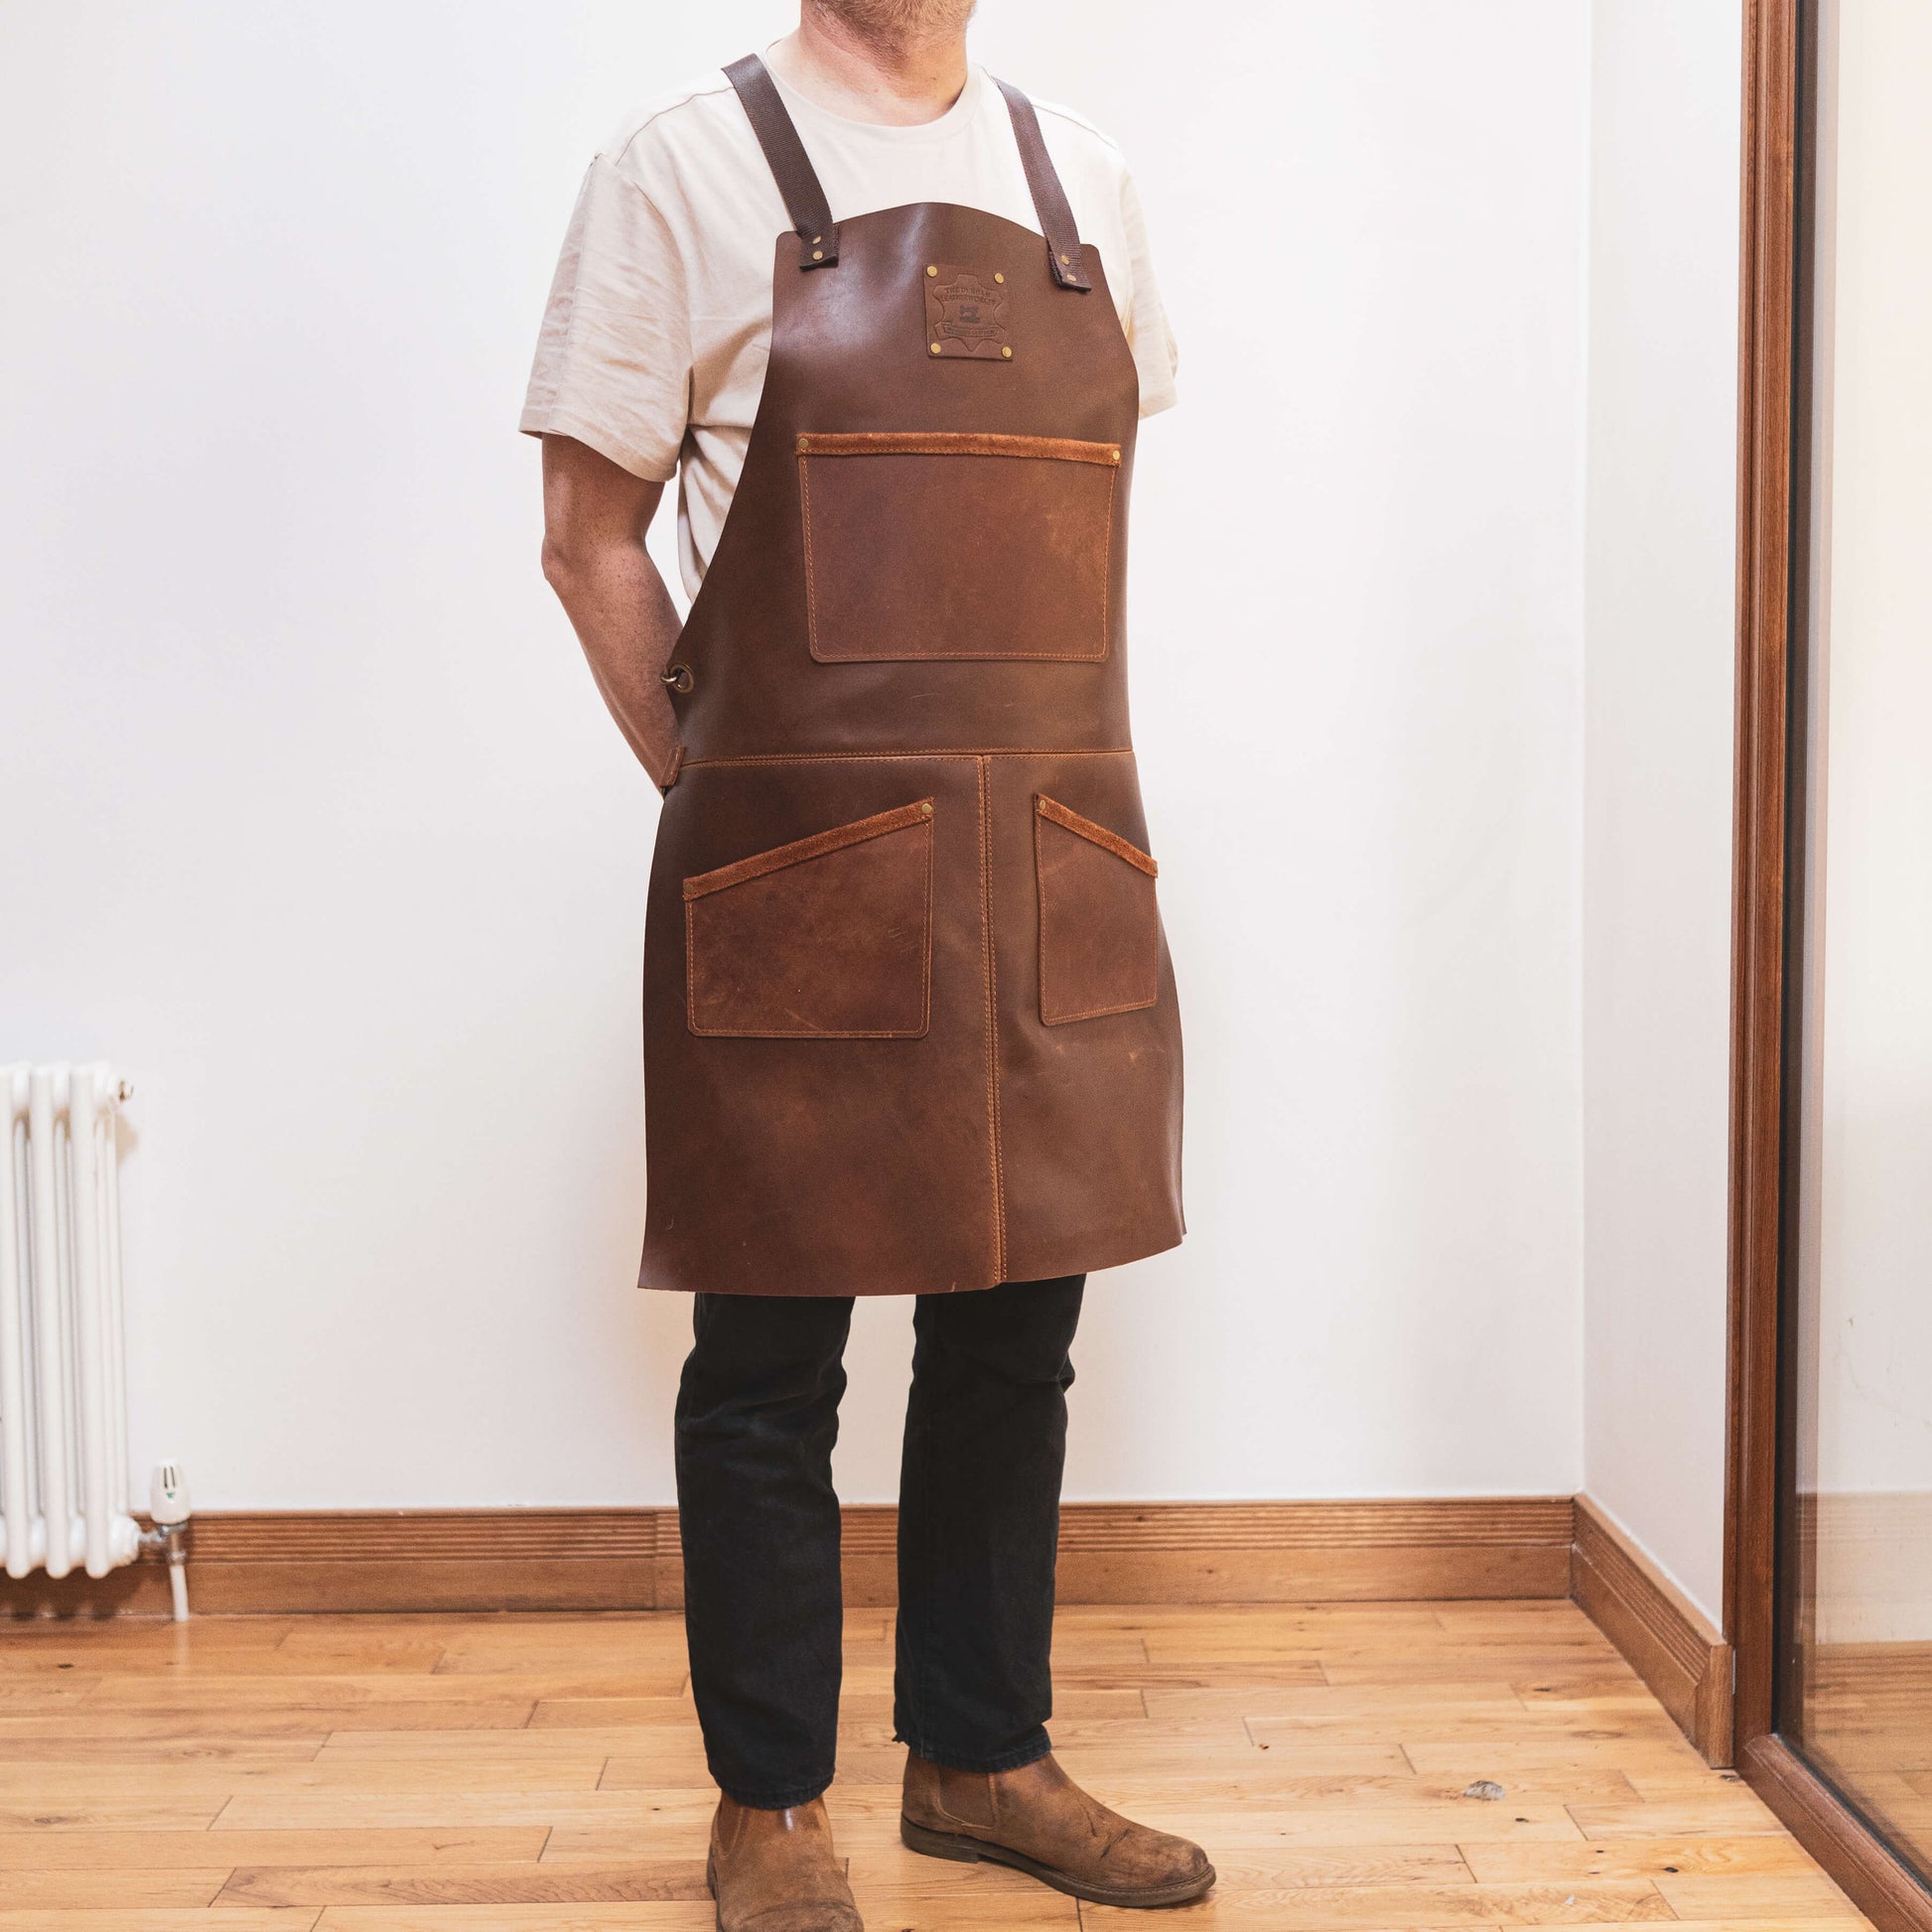 A carpenter wearing The Durham Leatherworker leather apron stands in a room with wooden flooring, facing a mirror. The apron has multiple pockets, and the person is dressed casually in a white t-shirt and dark jeans.